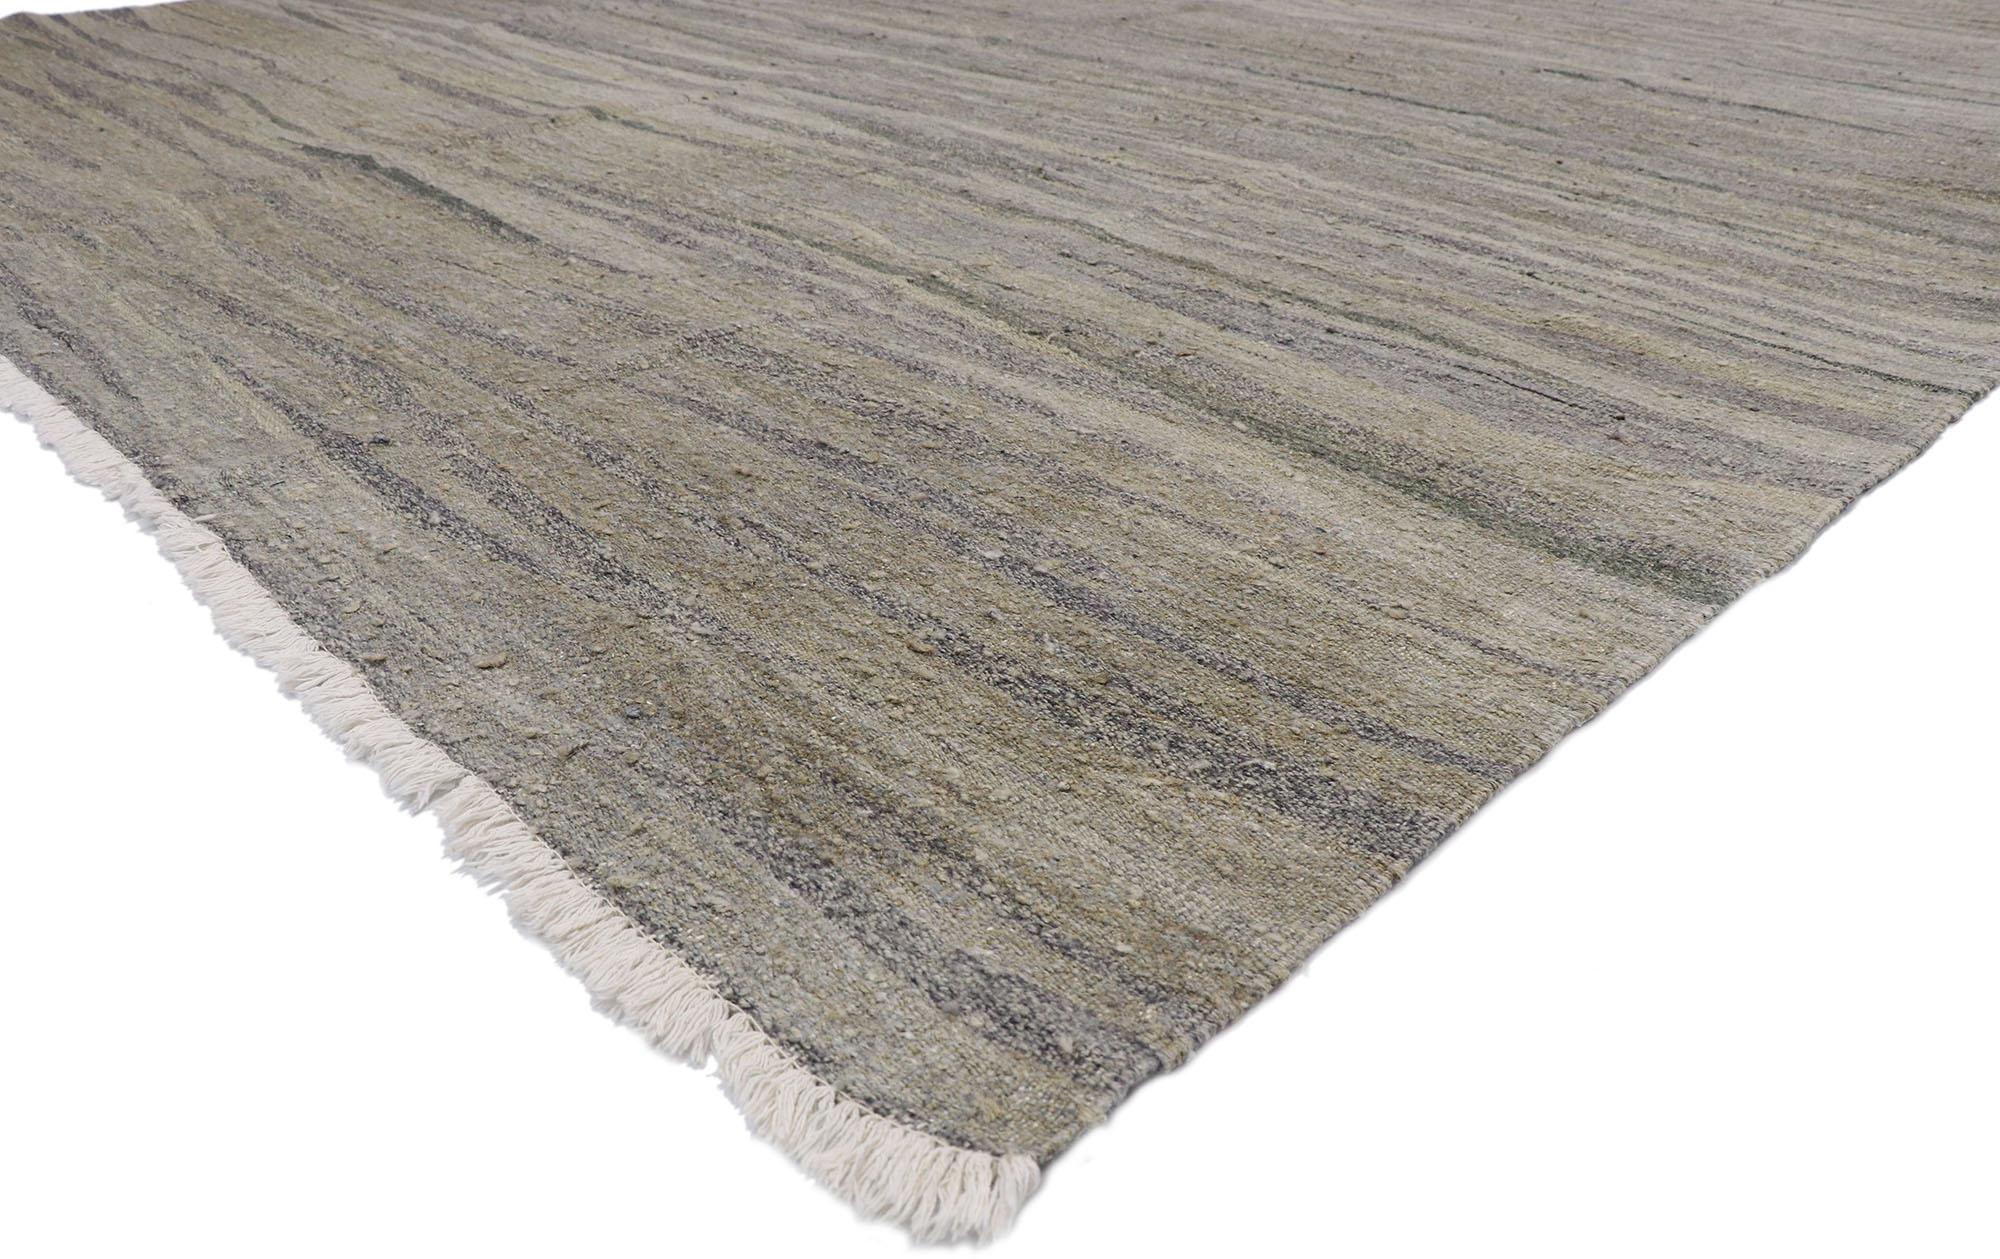 52763, vintage Turkish Kilim Area rug with Modernist International style, flat-weave rug. Modern and neutral, this handwoven wool vintage Turkish Kilim area rug embodies International style. It features subtle gradations of gray, slate, and taupe